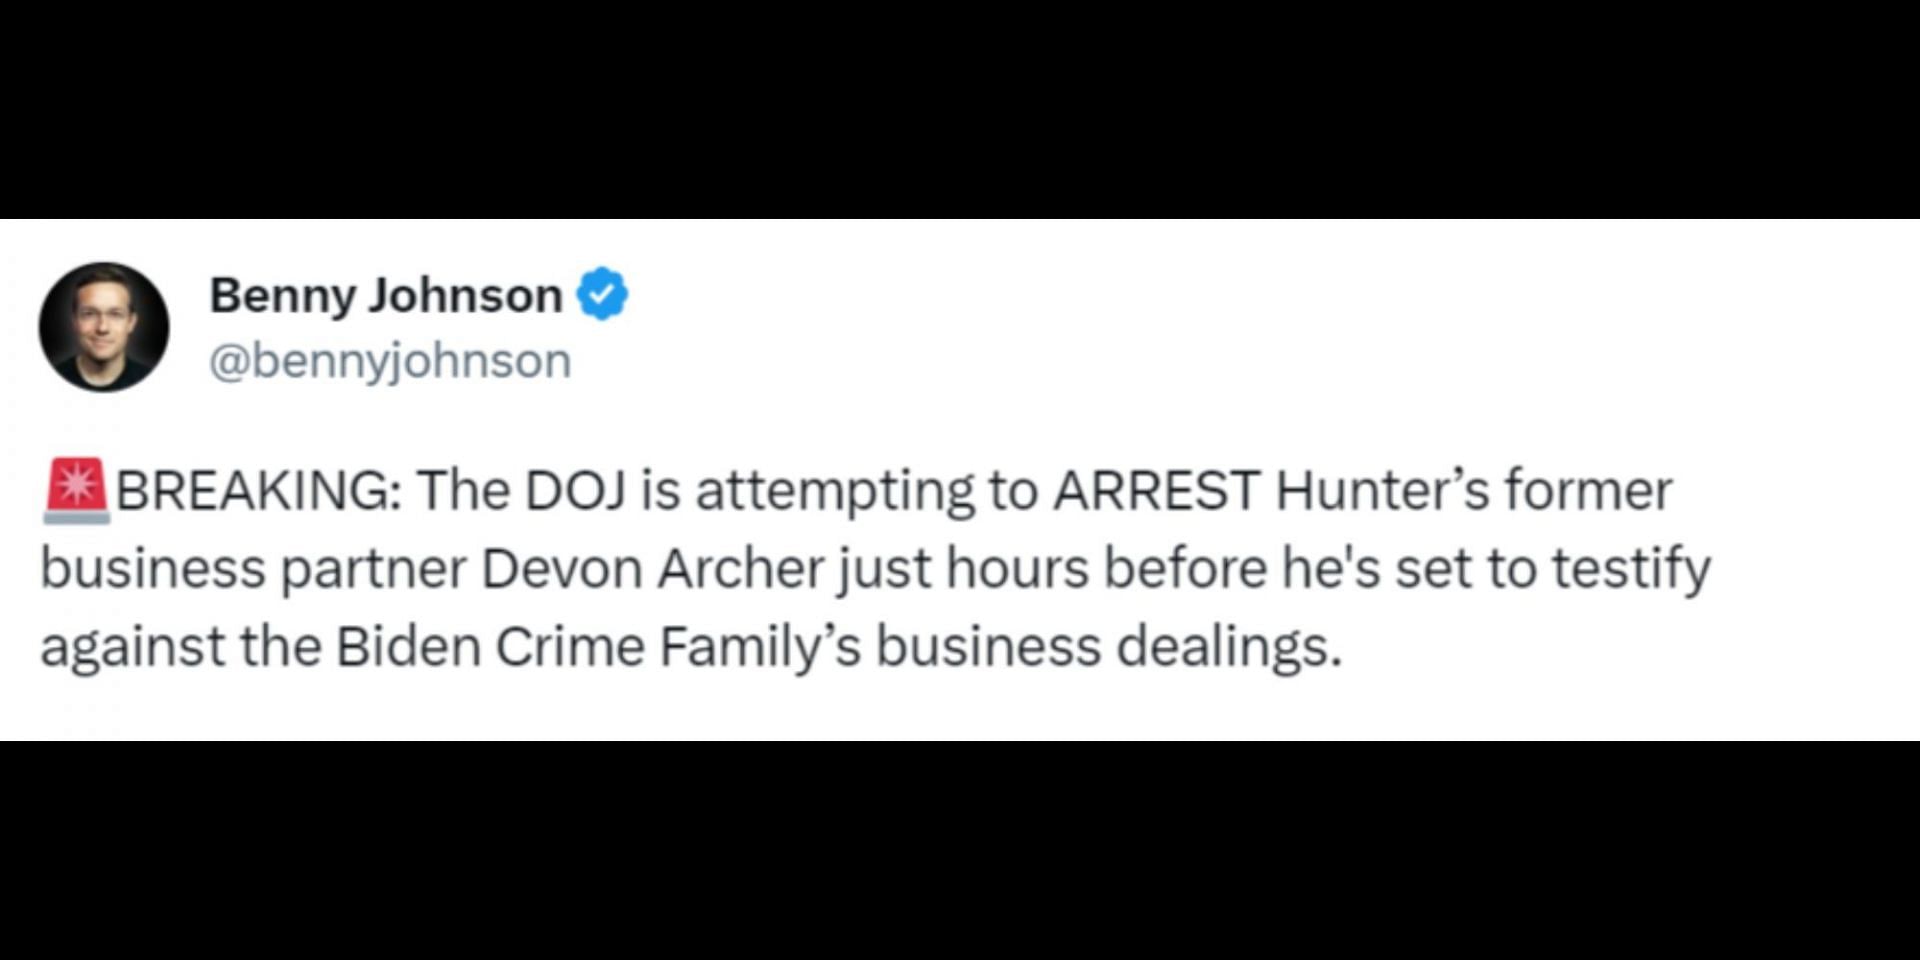 An arrest attempt is made against Hunter&#039;s former business partner hours before his testimony. (Image via Twitter/@bennyjohnson)